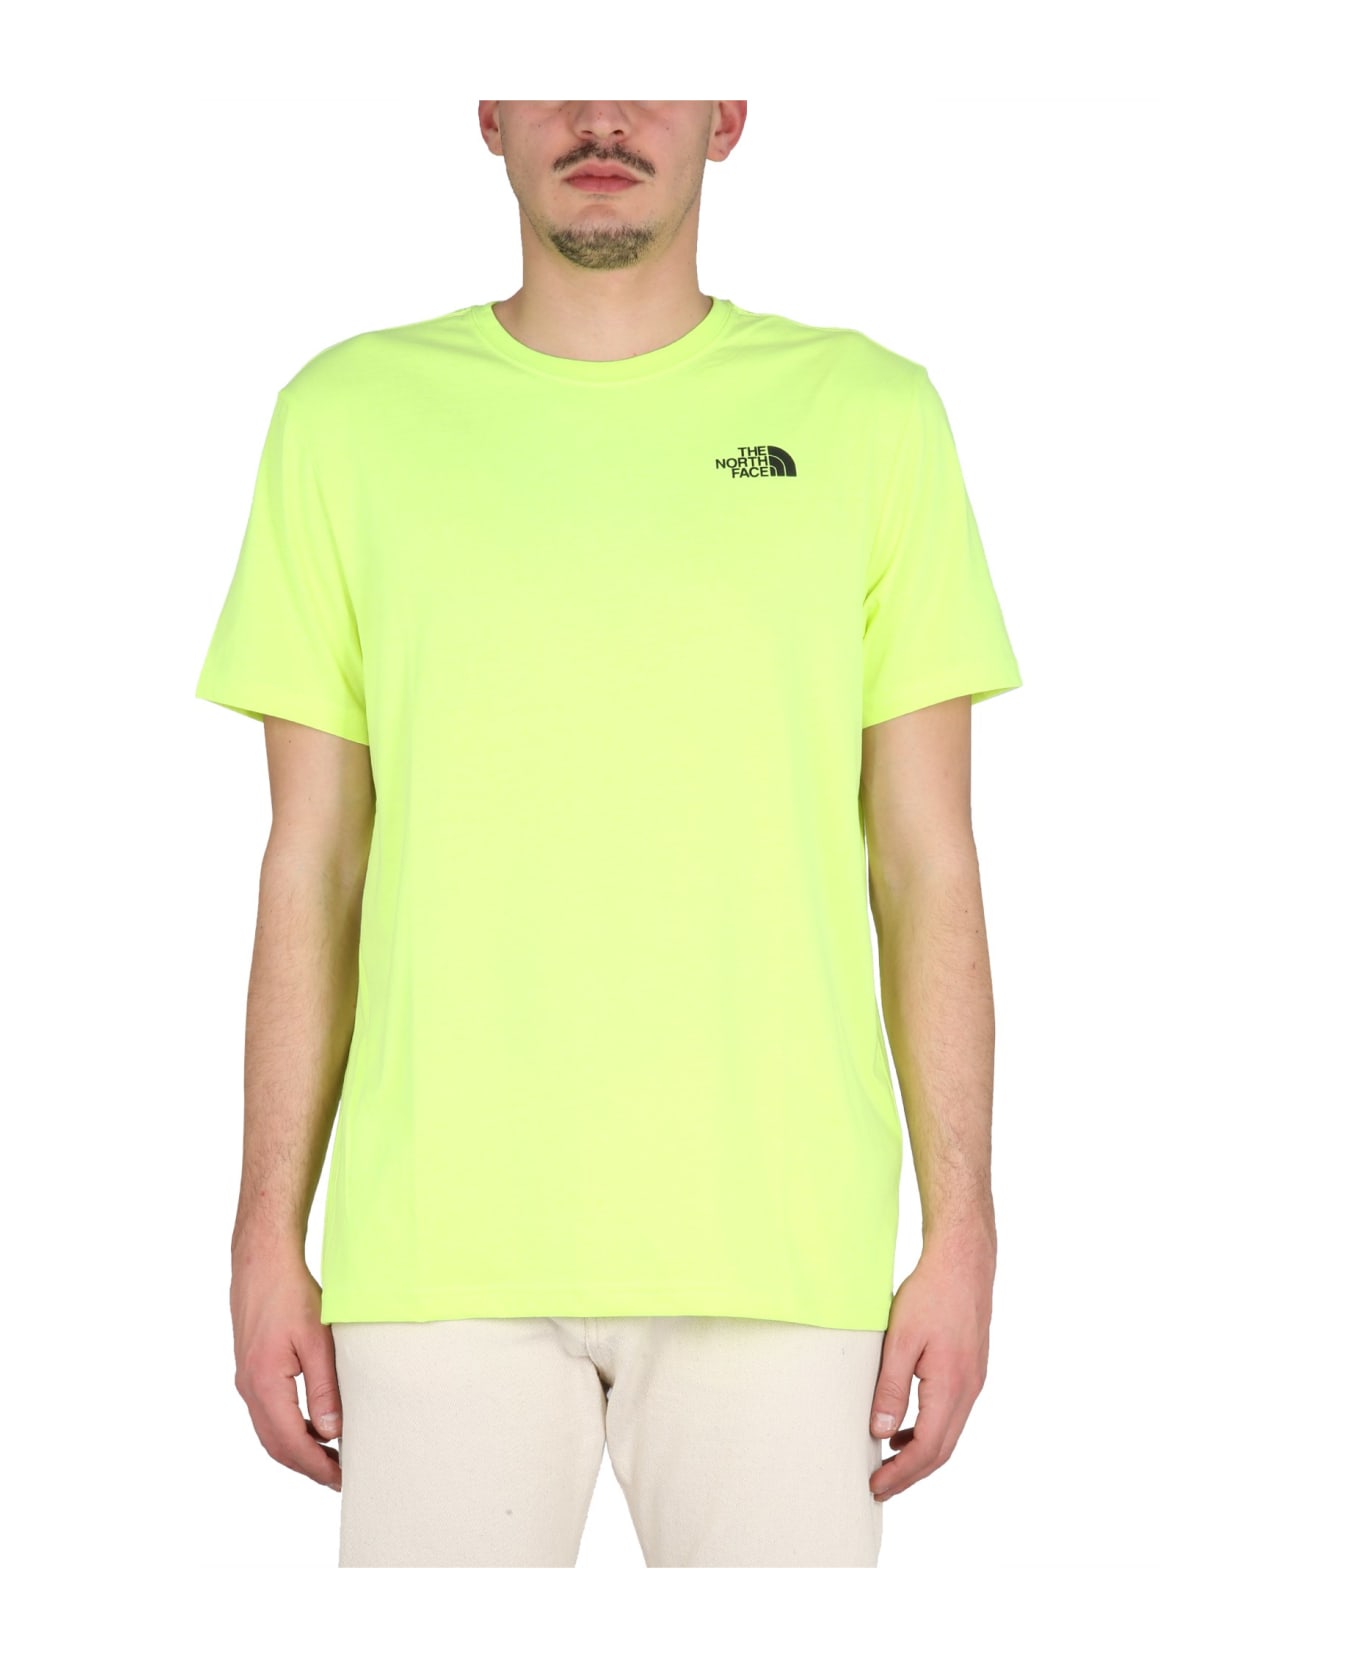 The North Face Redbox Reaxion T-shirt - YELLOW